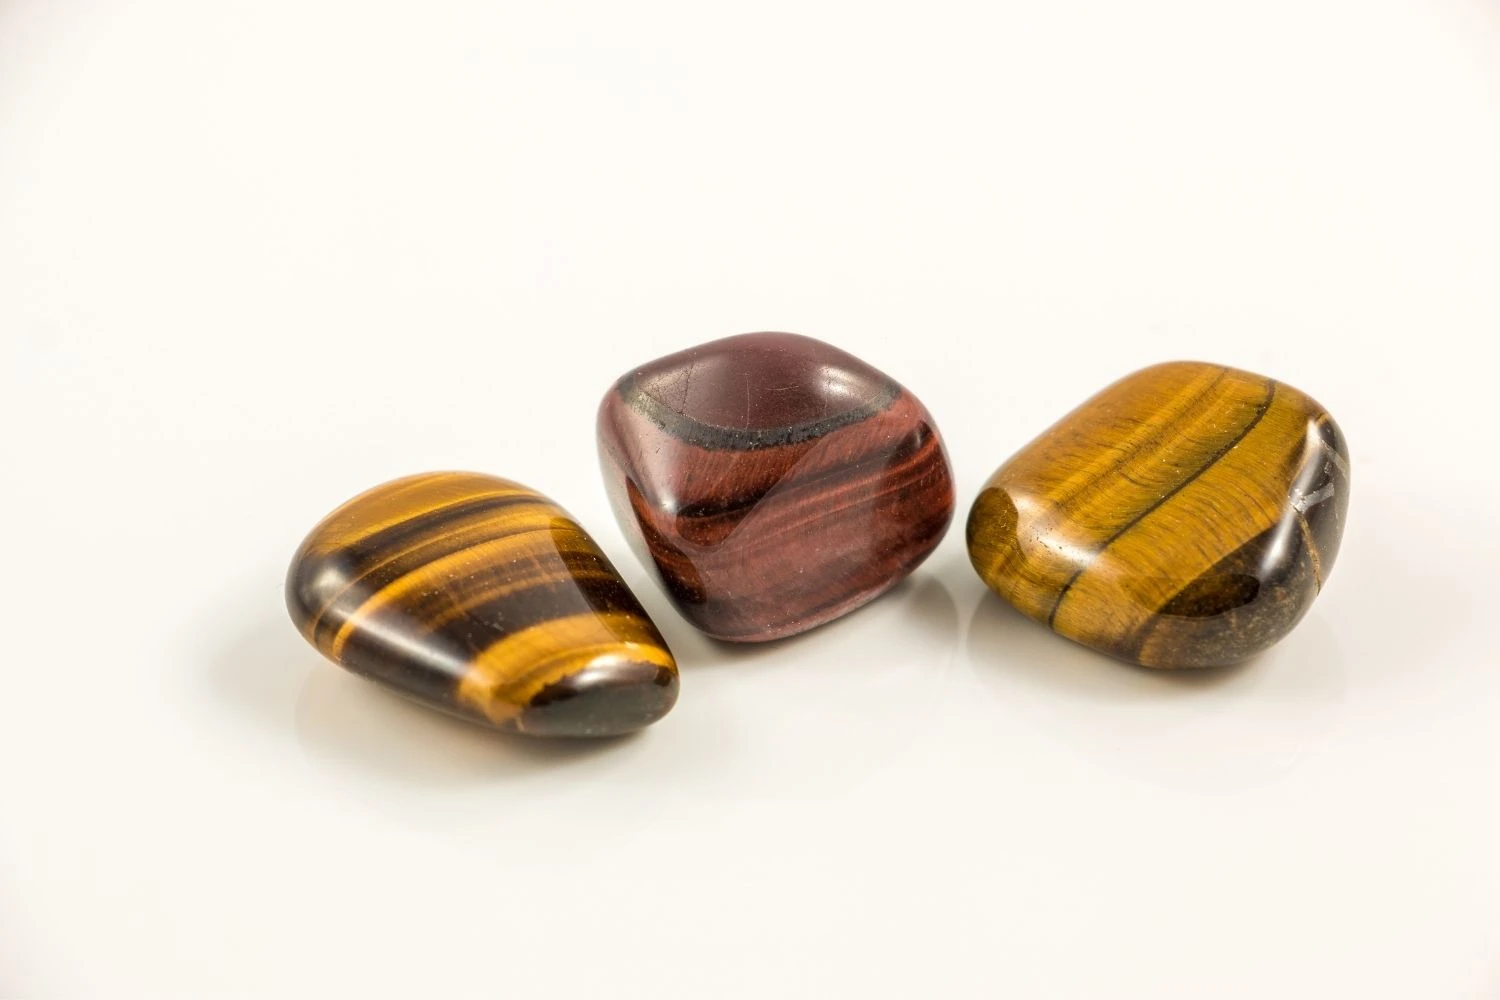 Tiger’s Eye, The Clarity Stone